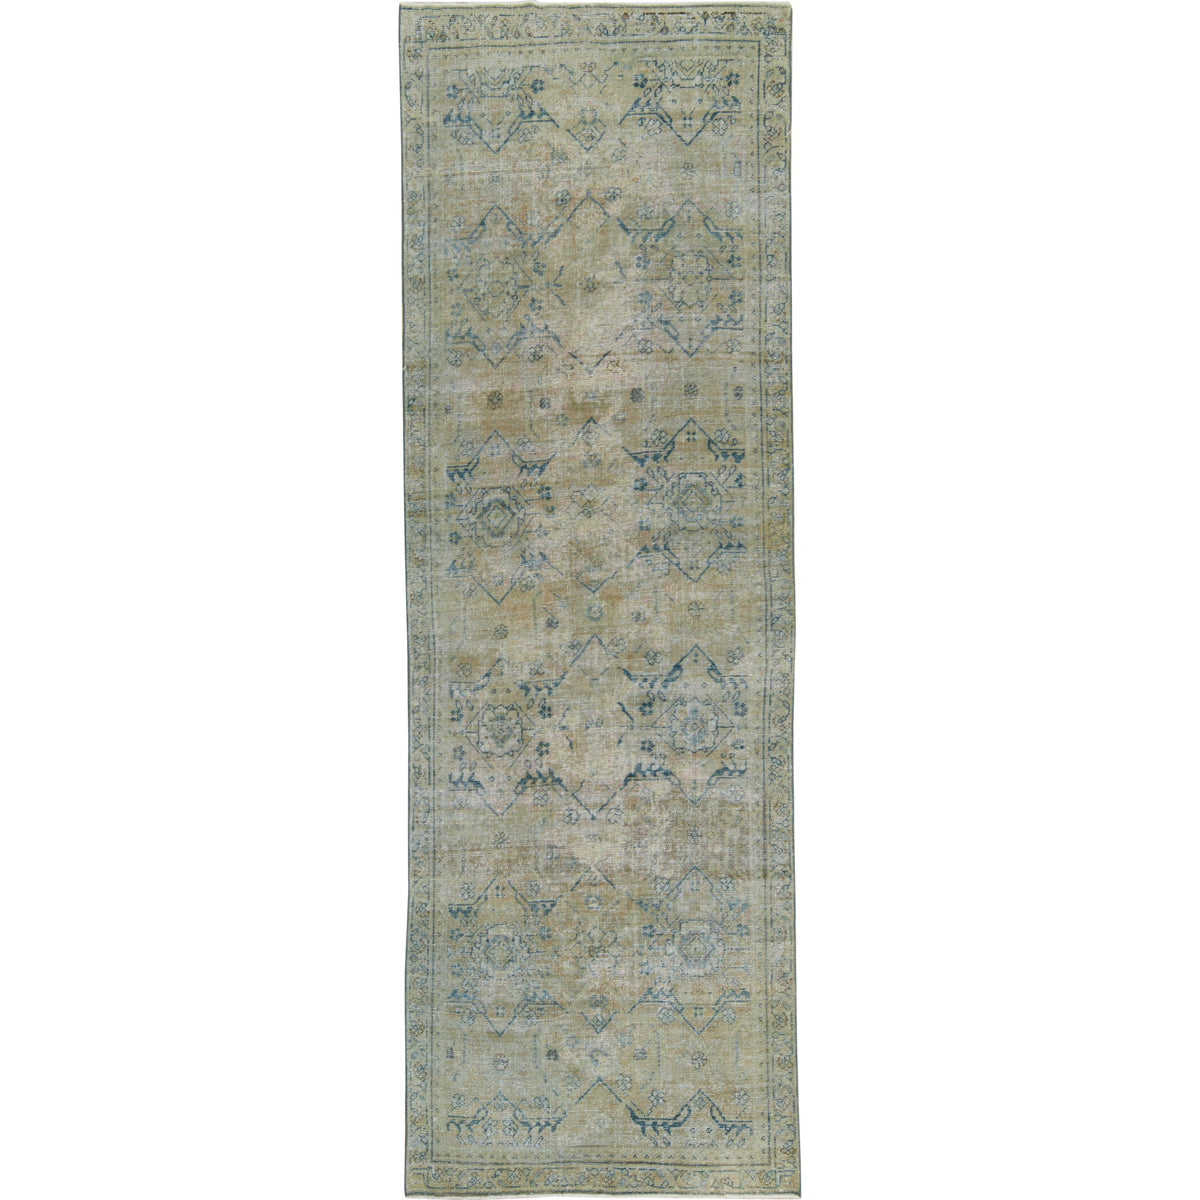 Sacrifice - The Beige Tapestry of Persian Legacy | Kuden Rugs